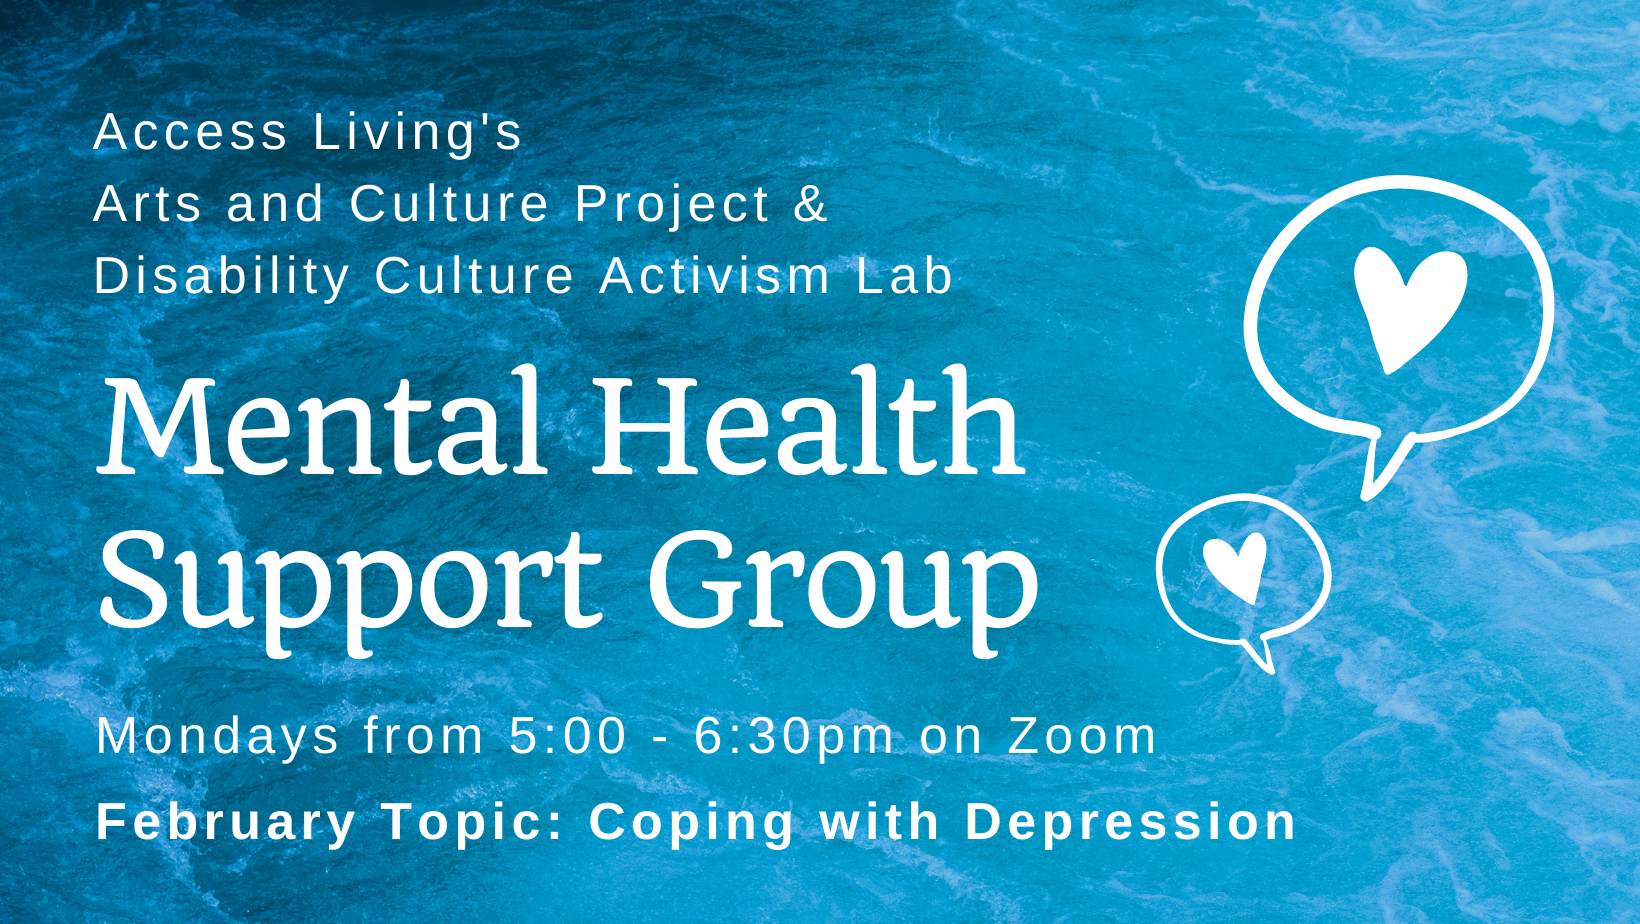 Blue graphic with white text that reads, "Access Living's Arts and Culture Project & Disability Culture Activism Lab MENTAL HEALTH SUPPORT GROUP. Mondays from 5-6:30PM. February Topic: Coping with Depression."